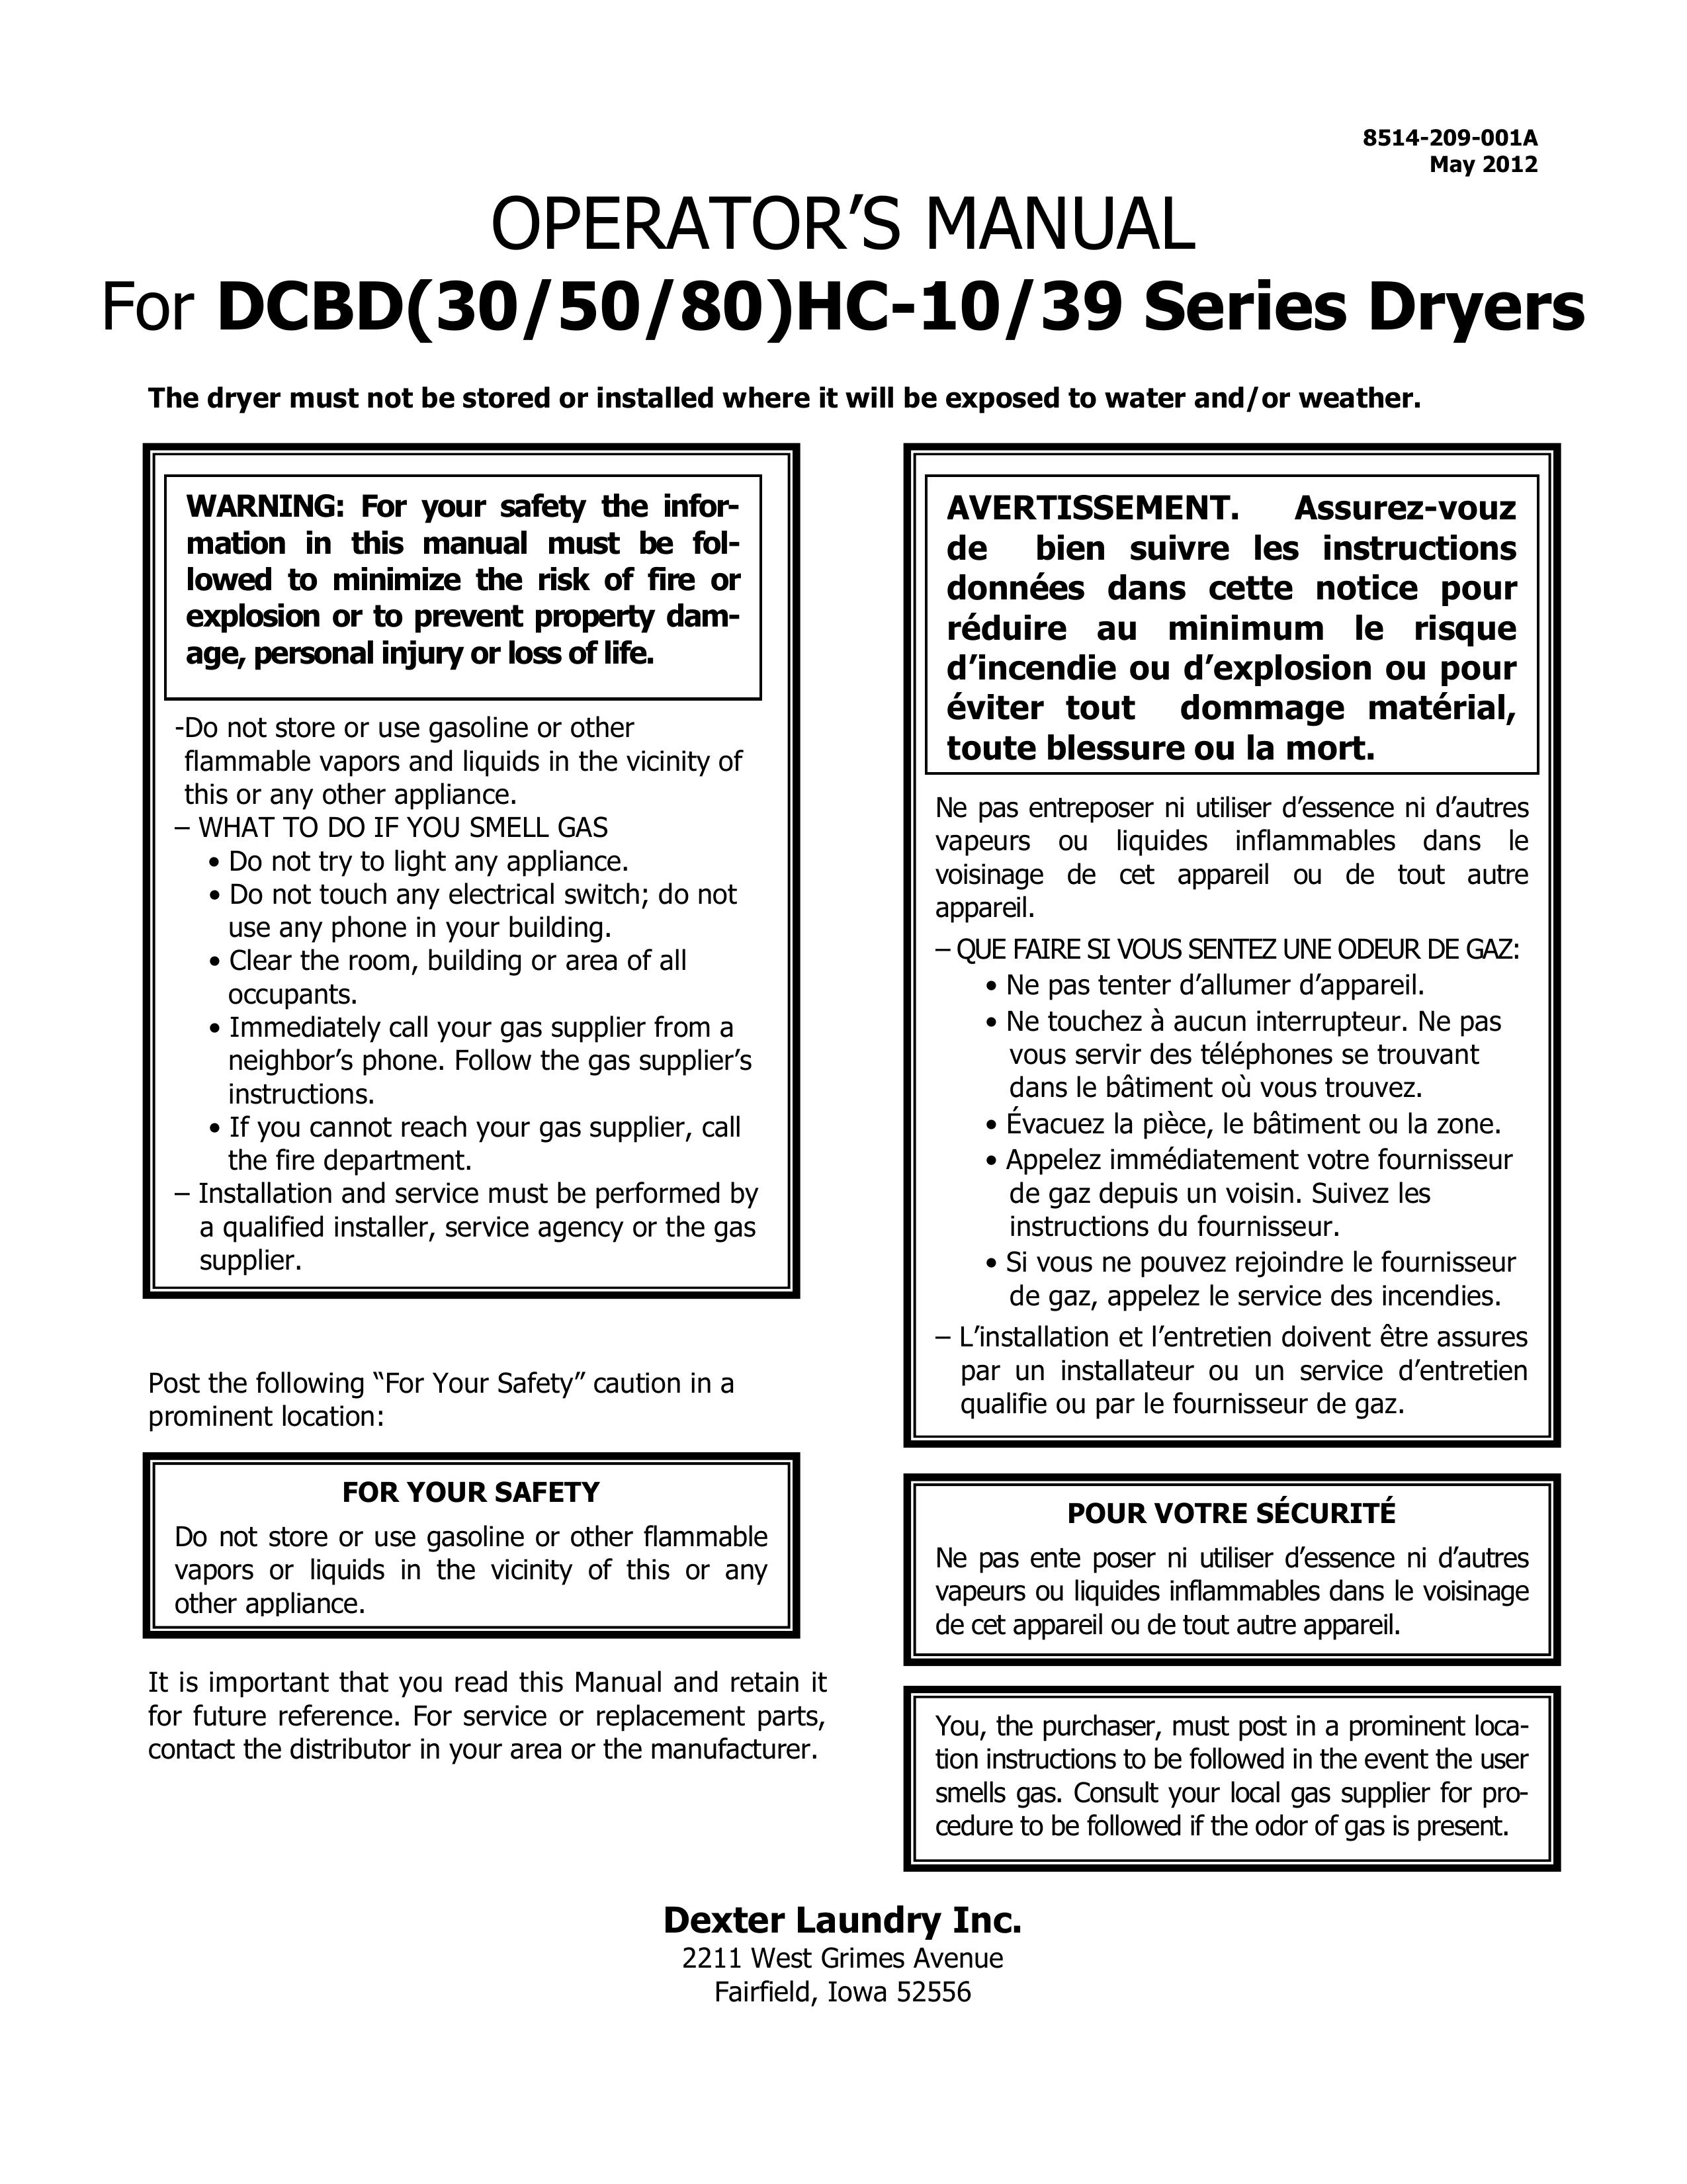 MRV Communications DCBD 30 Clothes Dryer User Manual (Page 1)